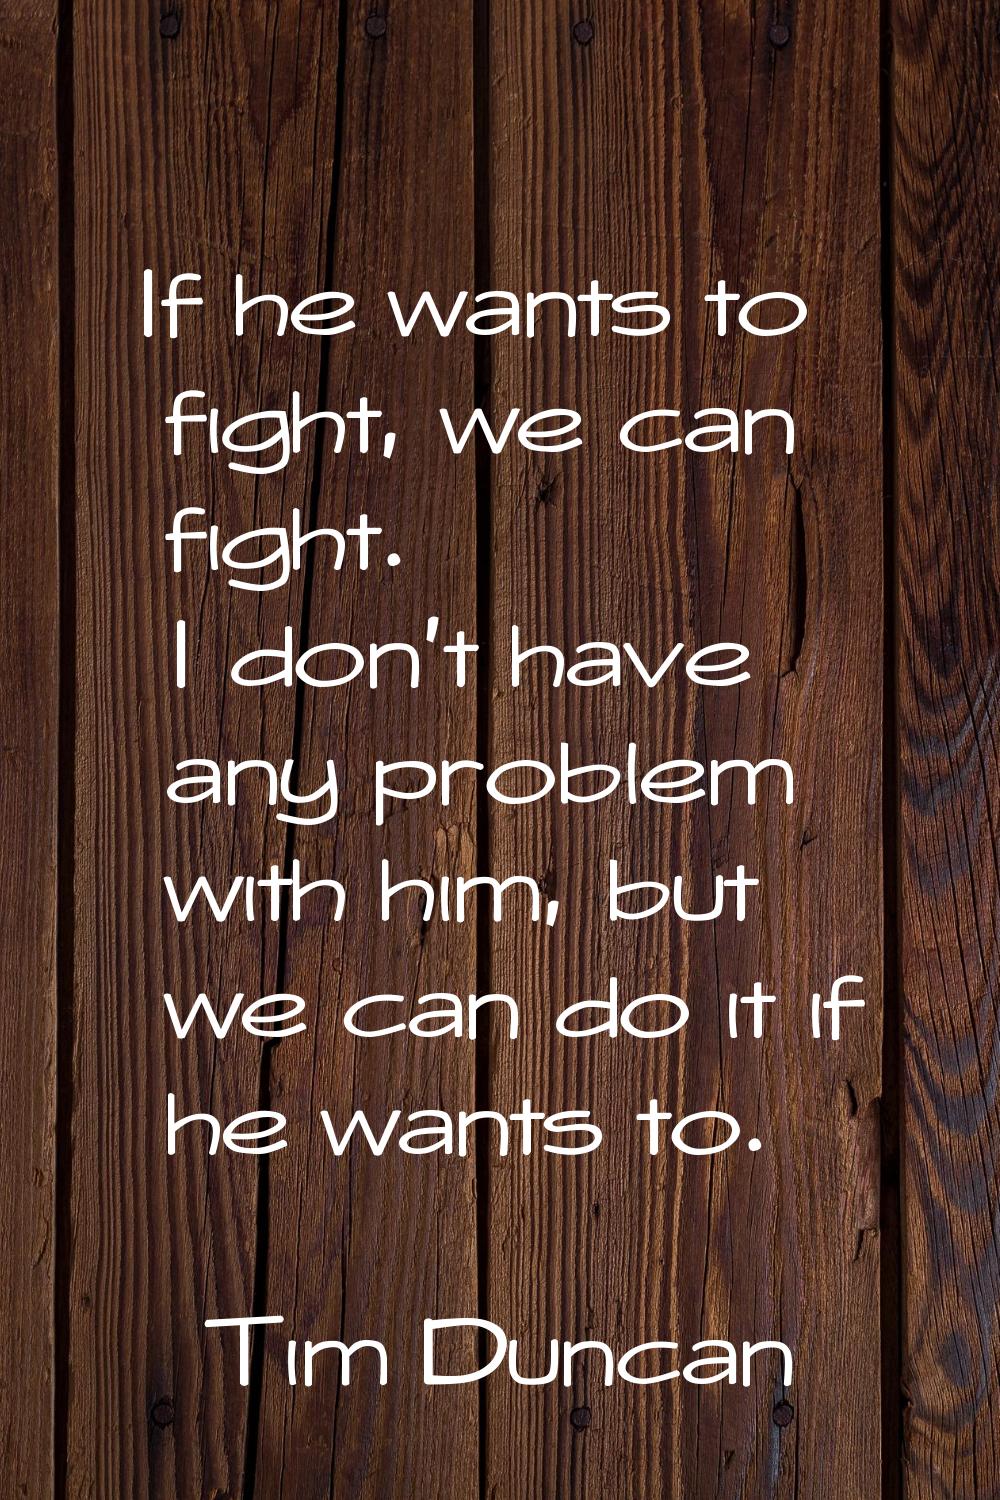 If he wants to fight, we can fight. I don't have any problem with him, but we can do it if he wants